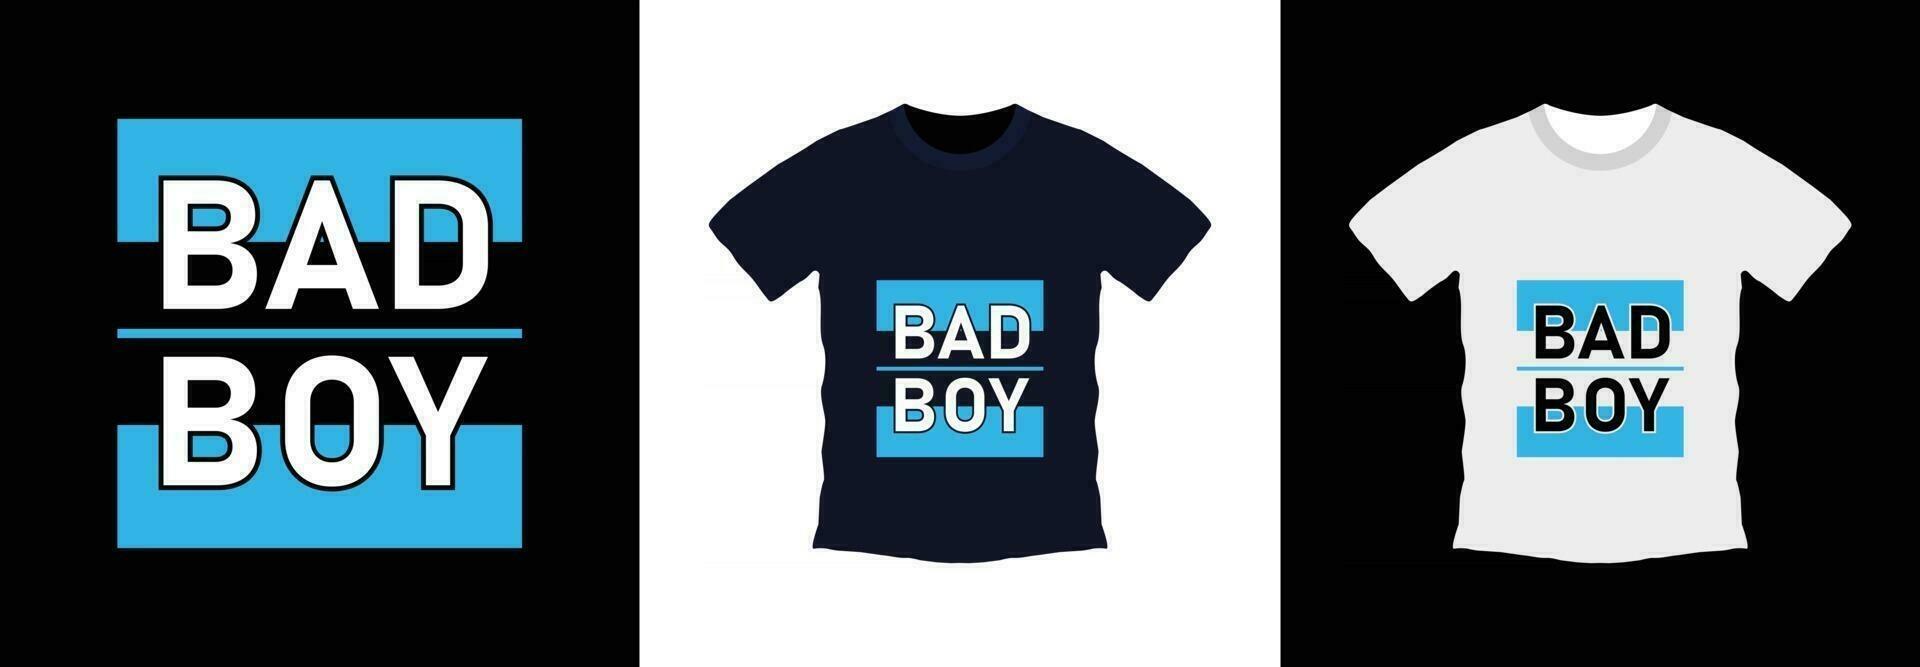 Bad boy typography t-shirt design. print ready, vector illustration. Global swatches